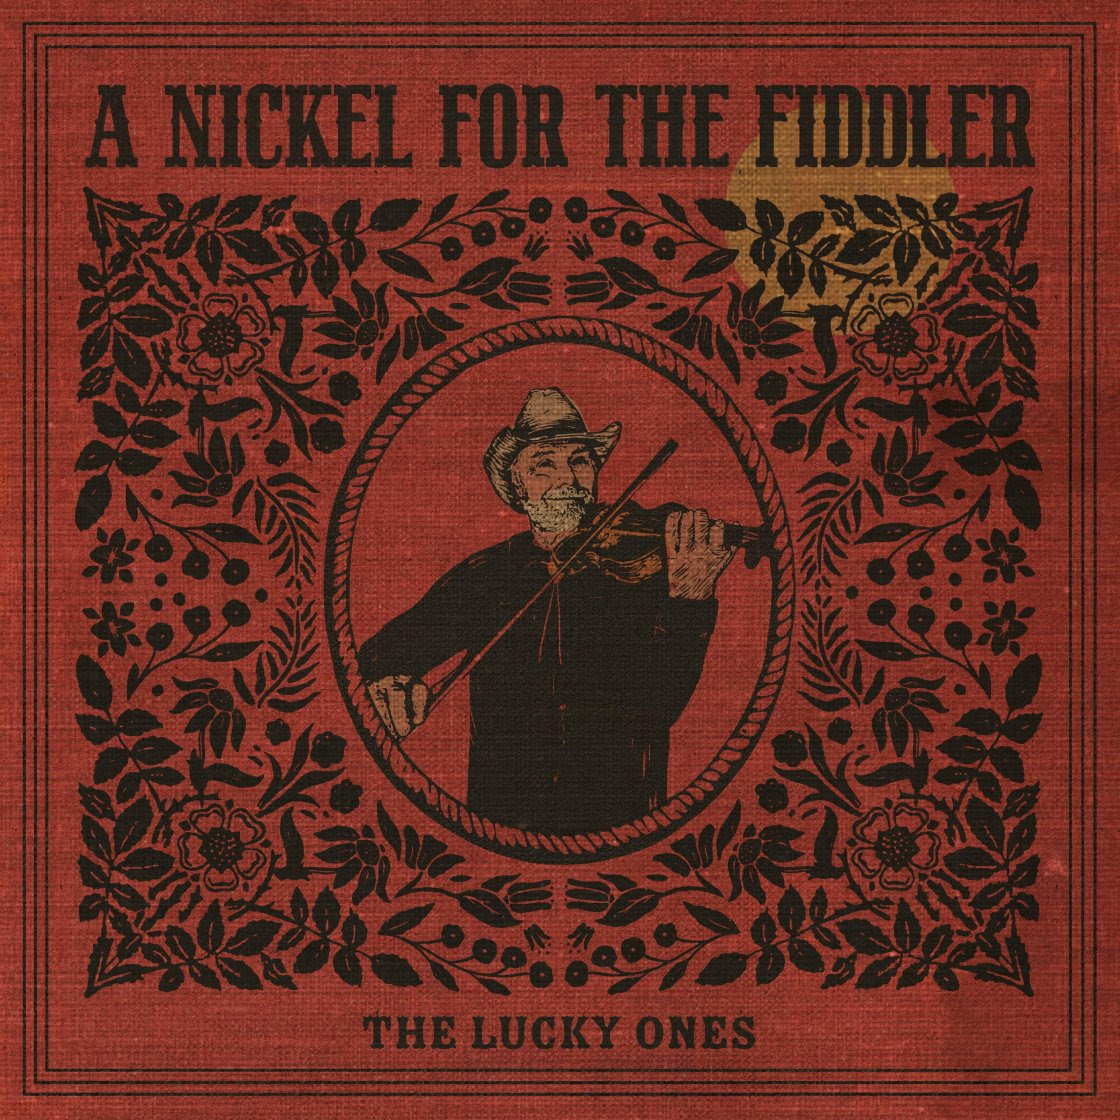 Canadian bluegrass outfit THE LUCKY ONES release A Nickel For The Fiddler EP